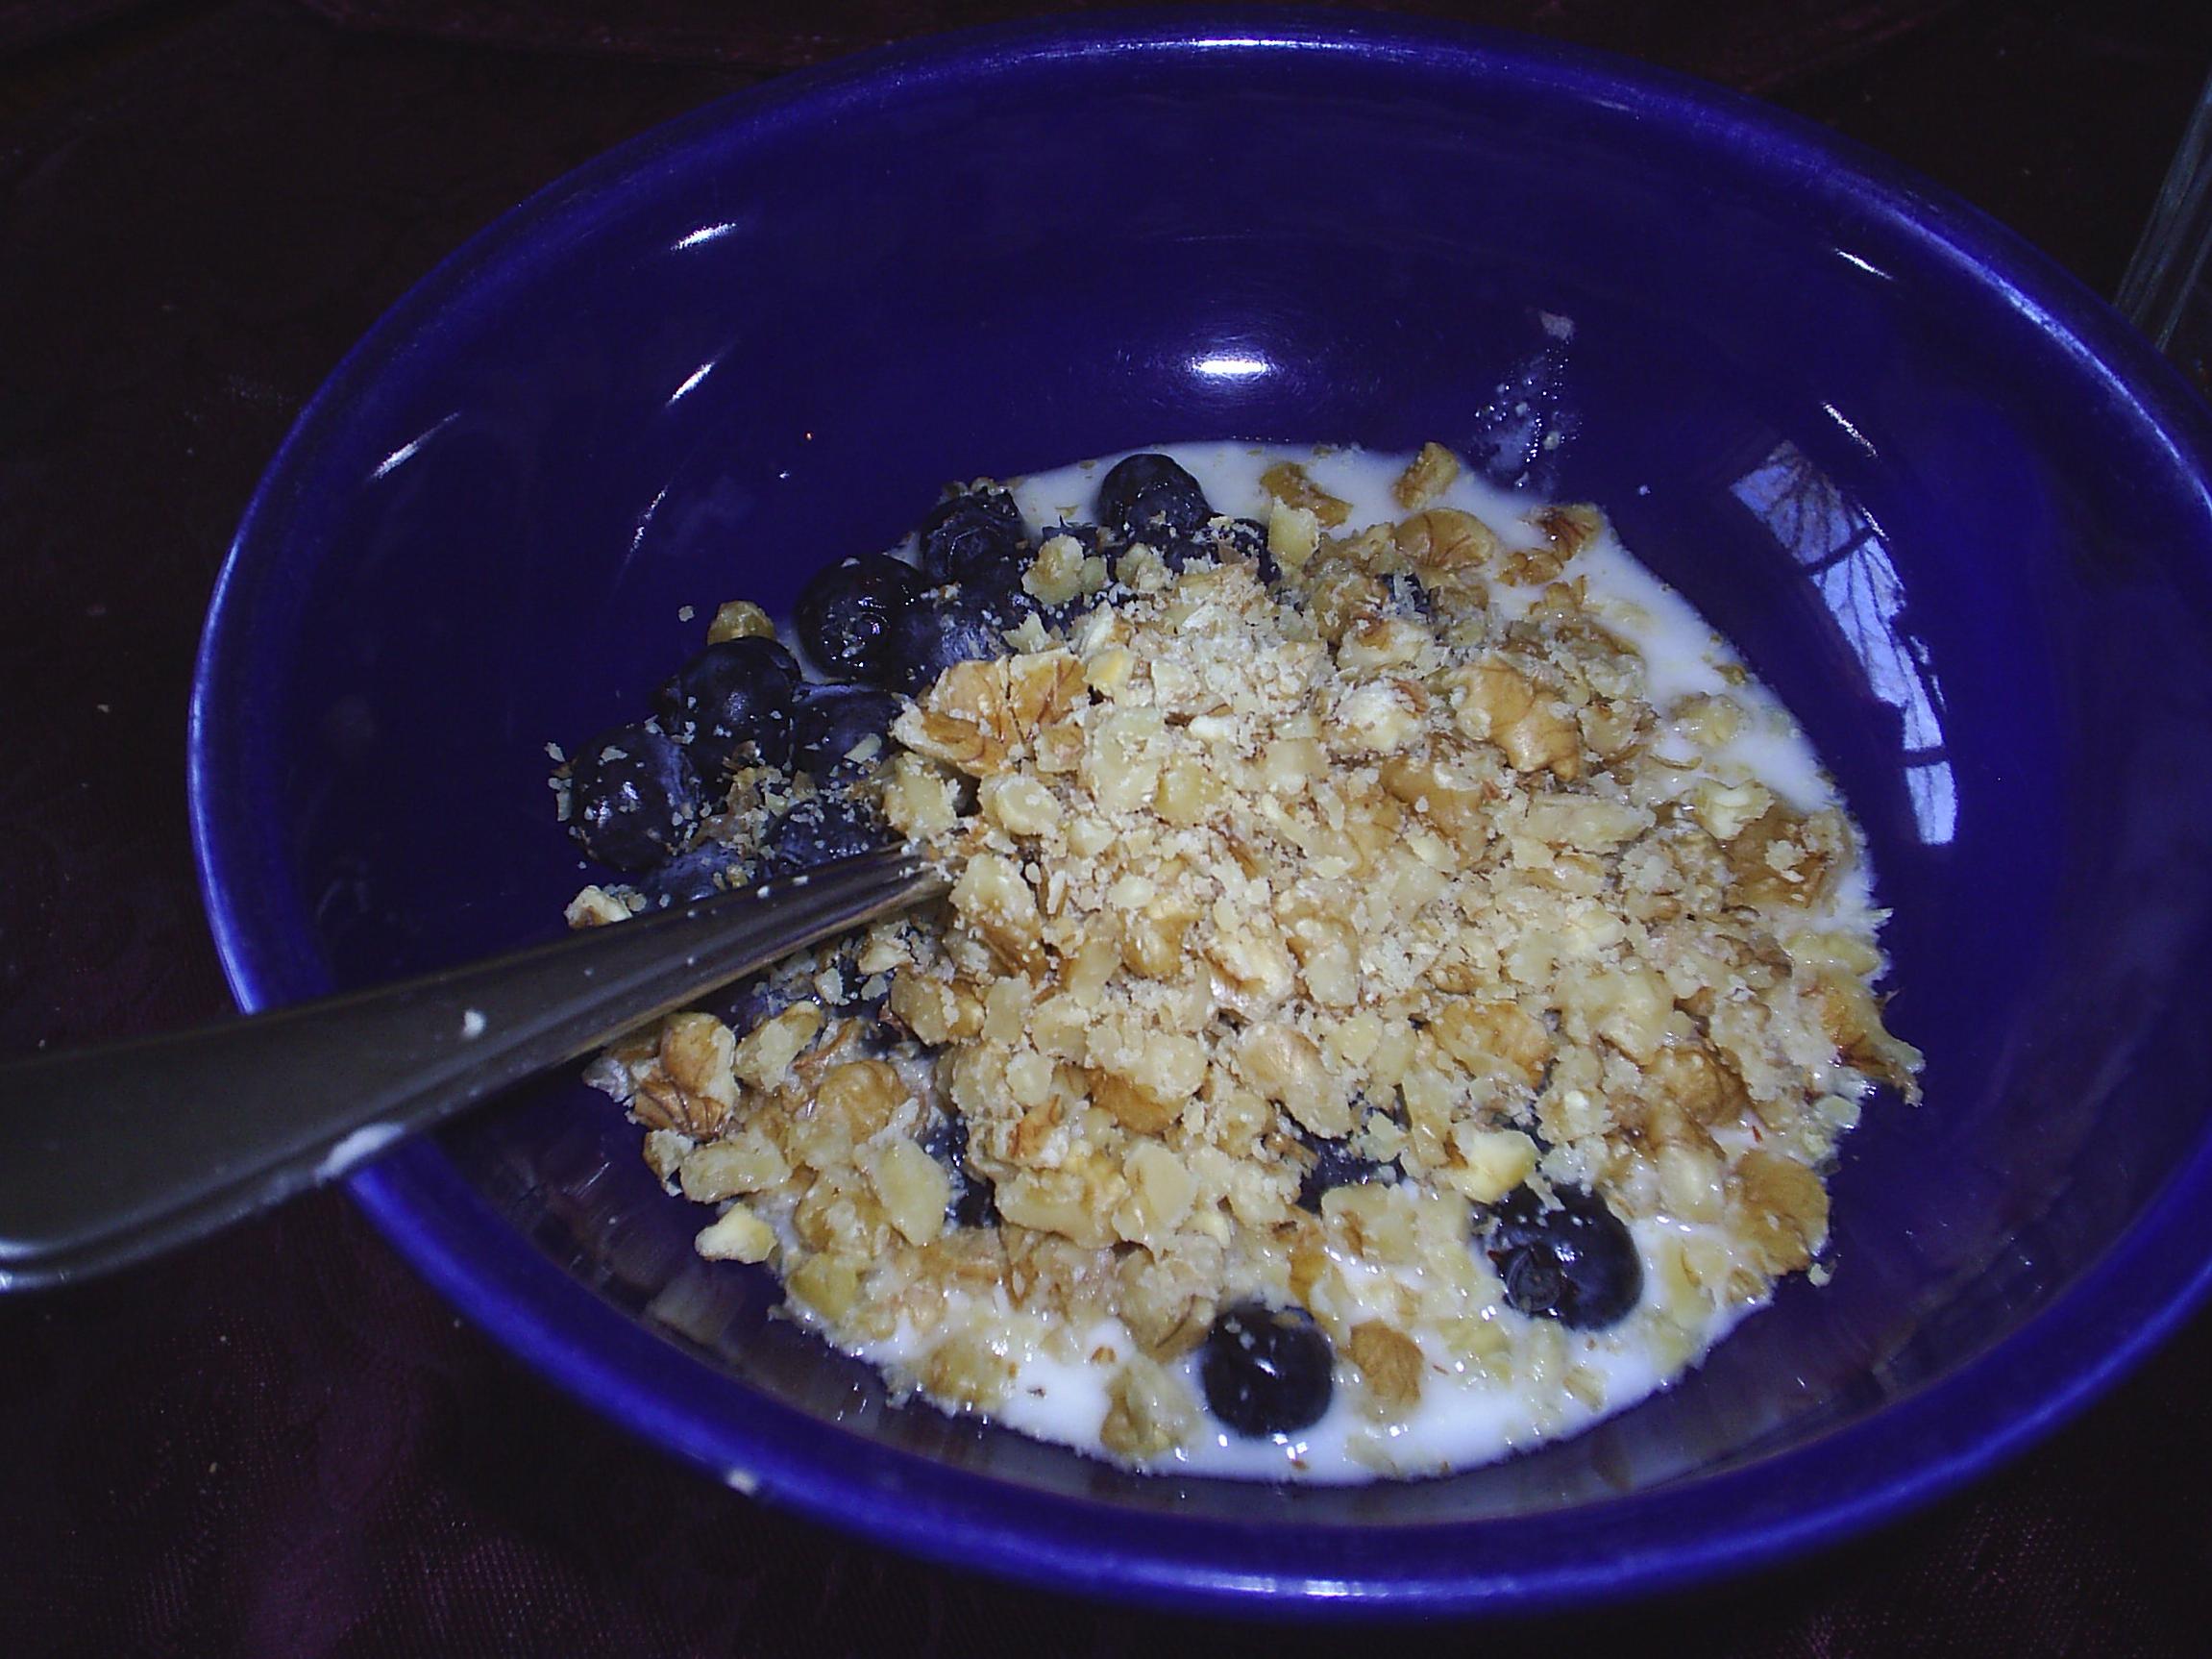 Delicious Gluten-Free Cereal Recipe for a Healthy Breakfast